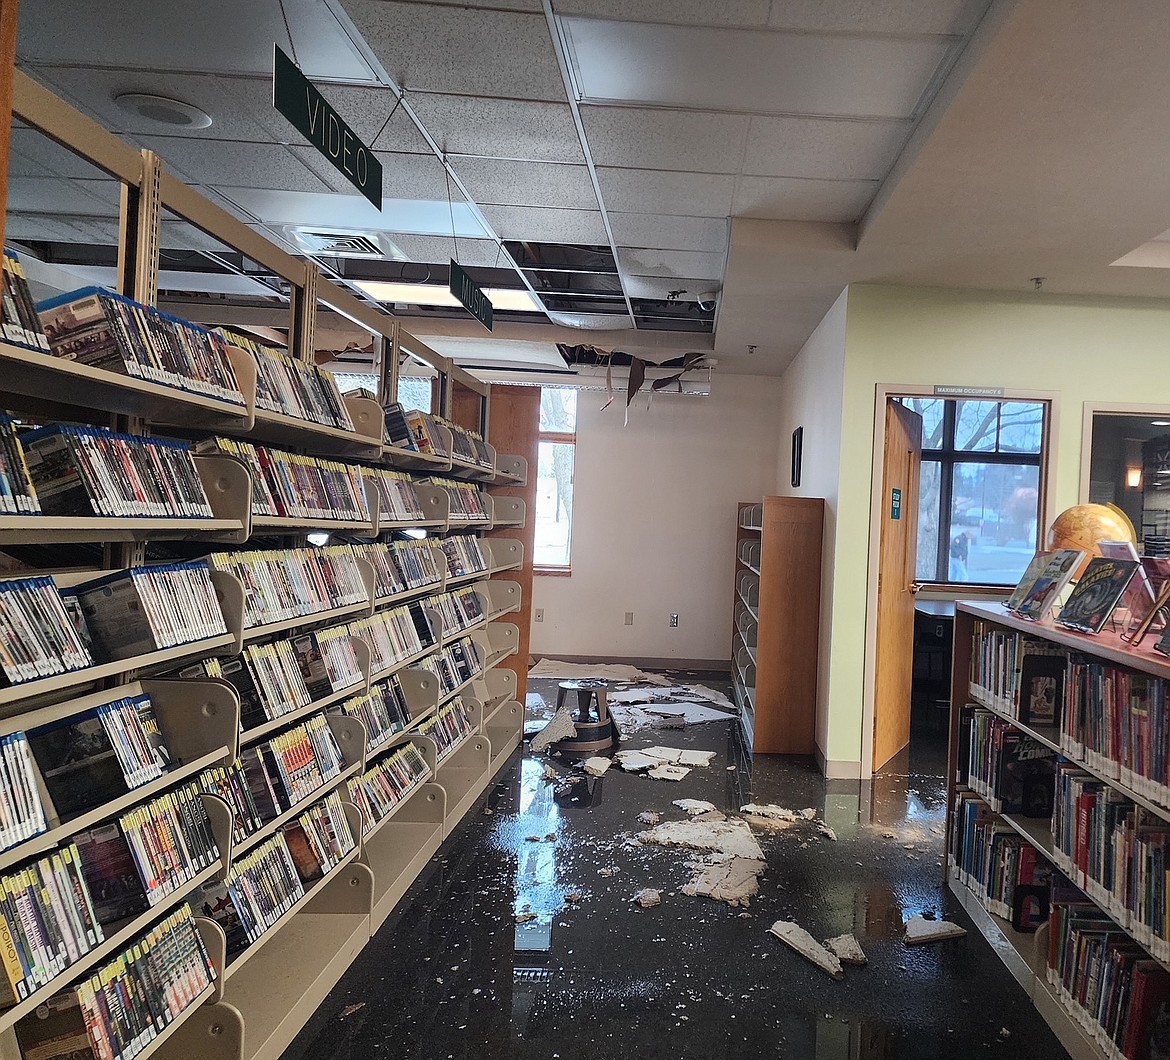 Water and pieces of ceiling are seen on the floor of the Post Falls Library in mid-January following weather-related damage. The Community Library Network's board of trustees will hold an emergency meeting at 2:45  p.m. Thursday during which insurance costs, emergency funds and staffing layoffs will be discussed.